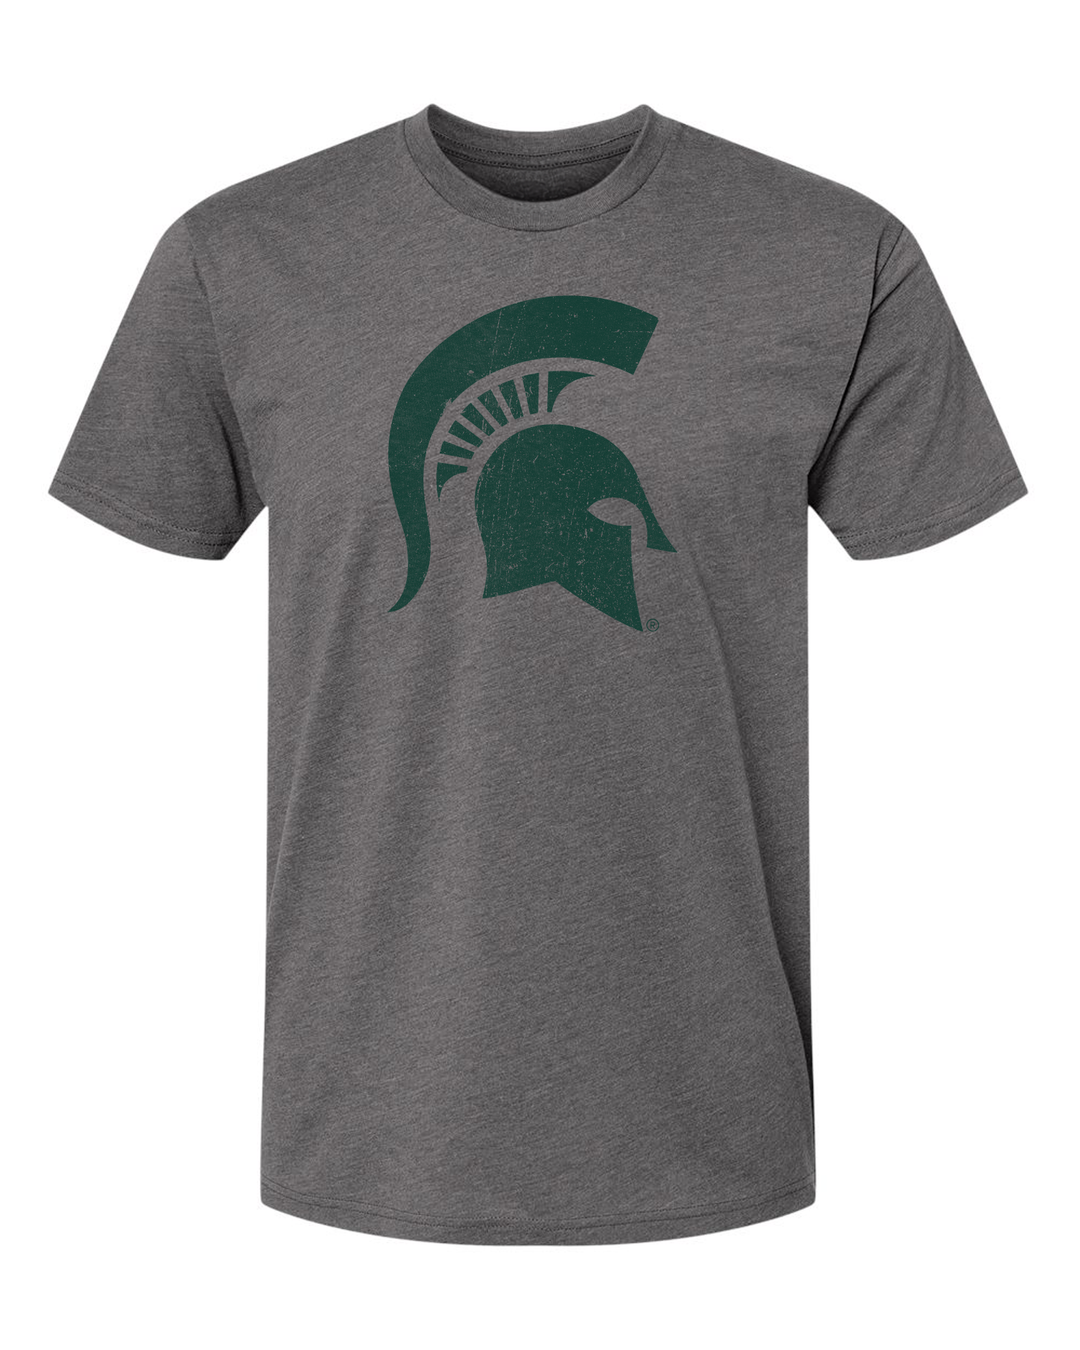 Grey t-shirt with a white background showing a Michigan State Spartan Helmet print on the chest in green. 